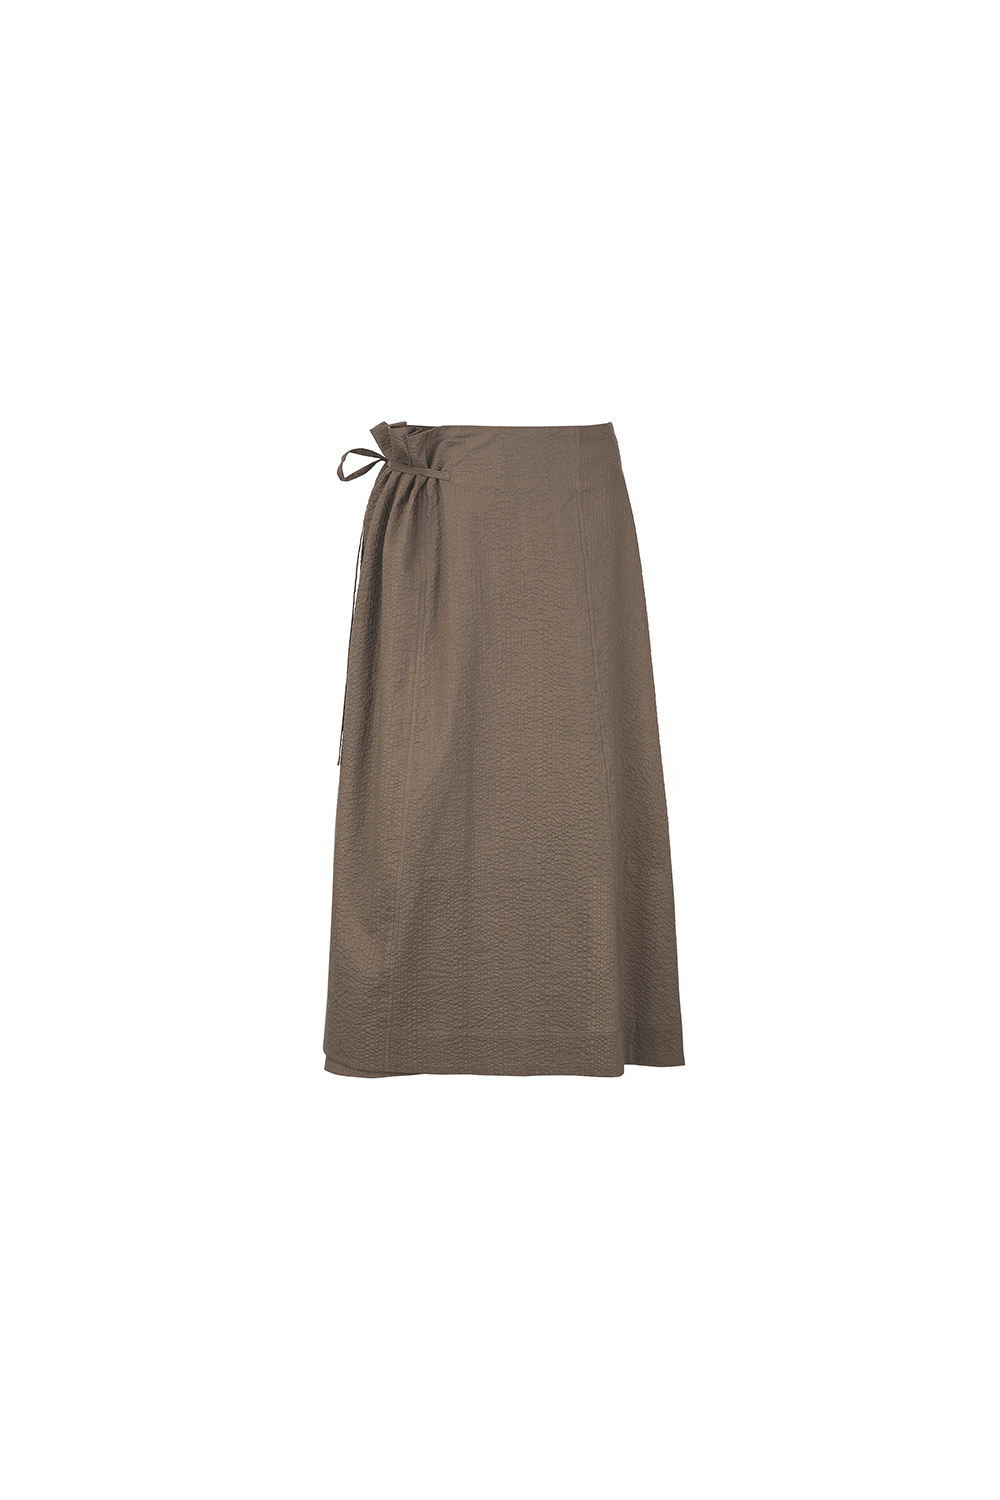 skirt oatmeal color image-S1L9